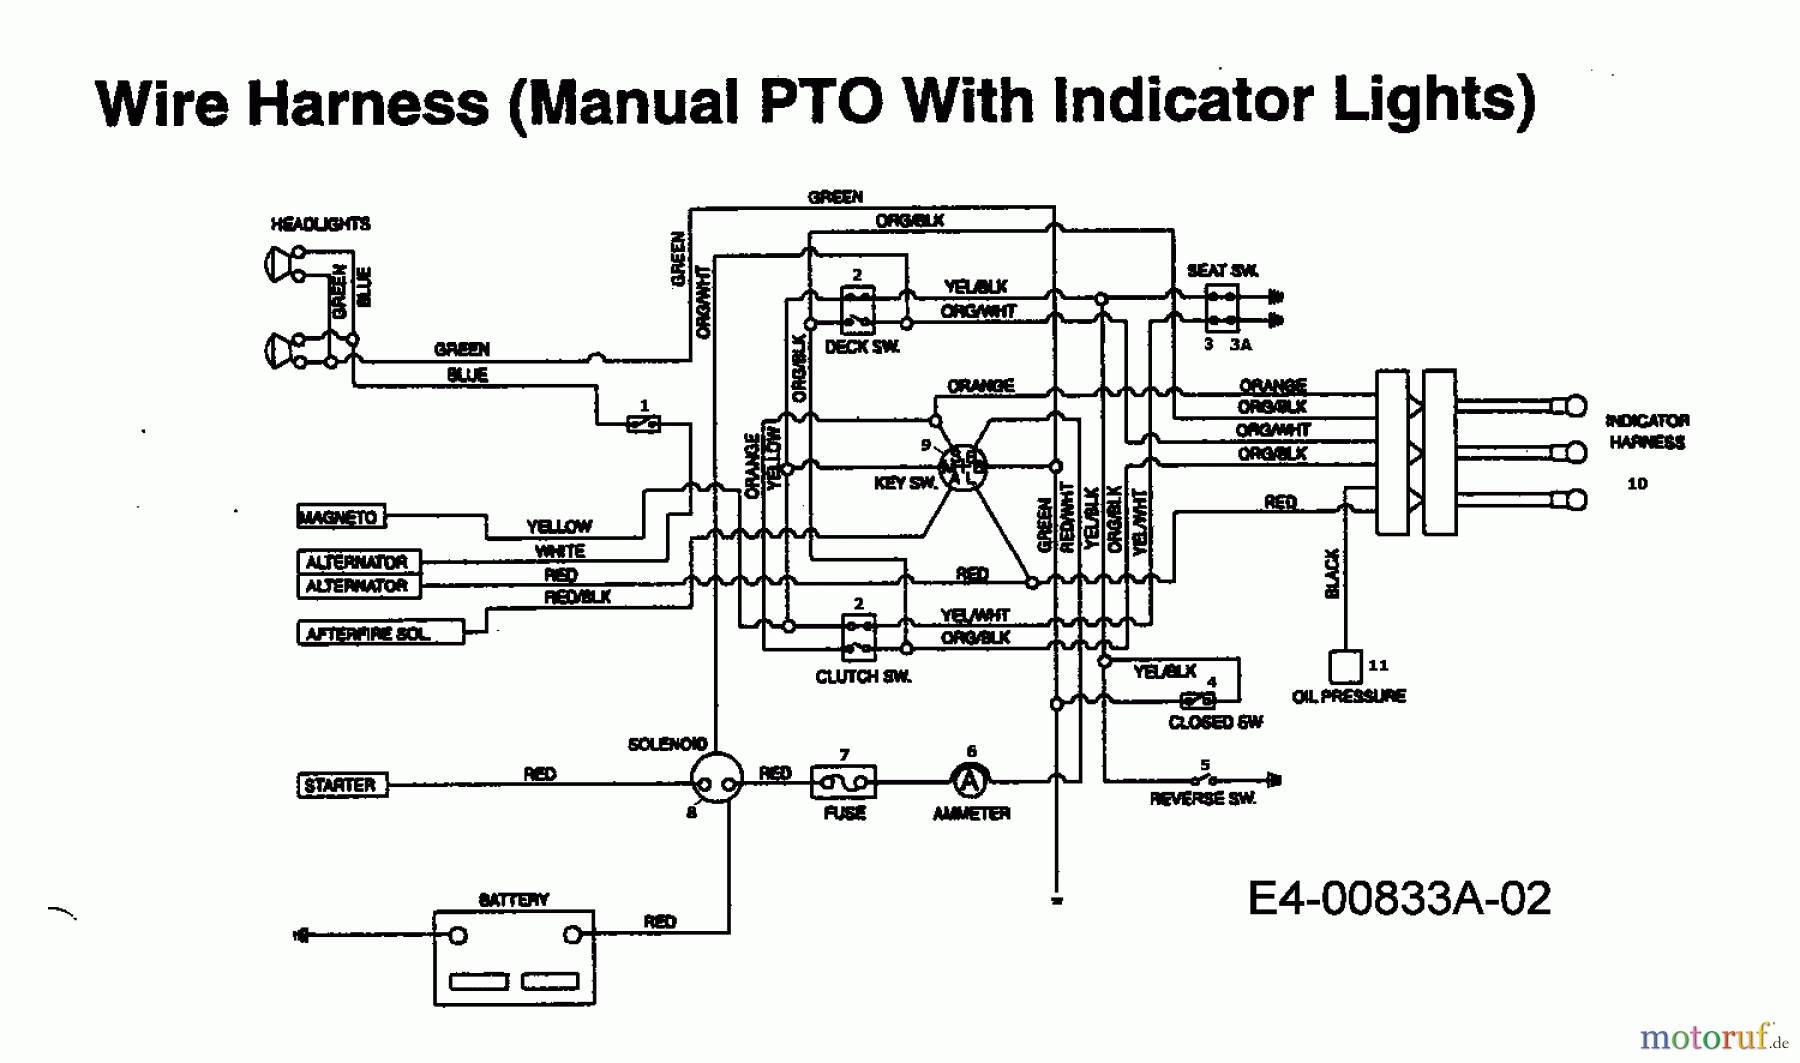  MTD Lawn tractors EH/145 13AM795N678  (1998) Wiring diagram with indicator lights